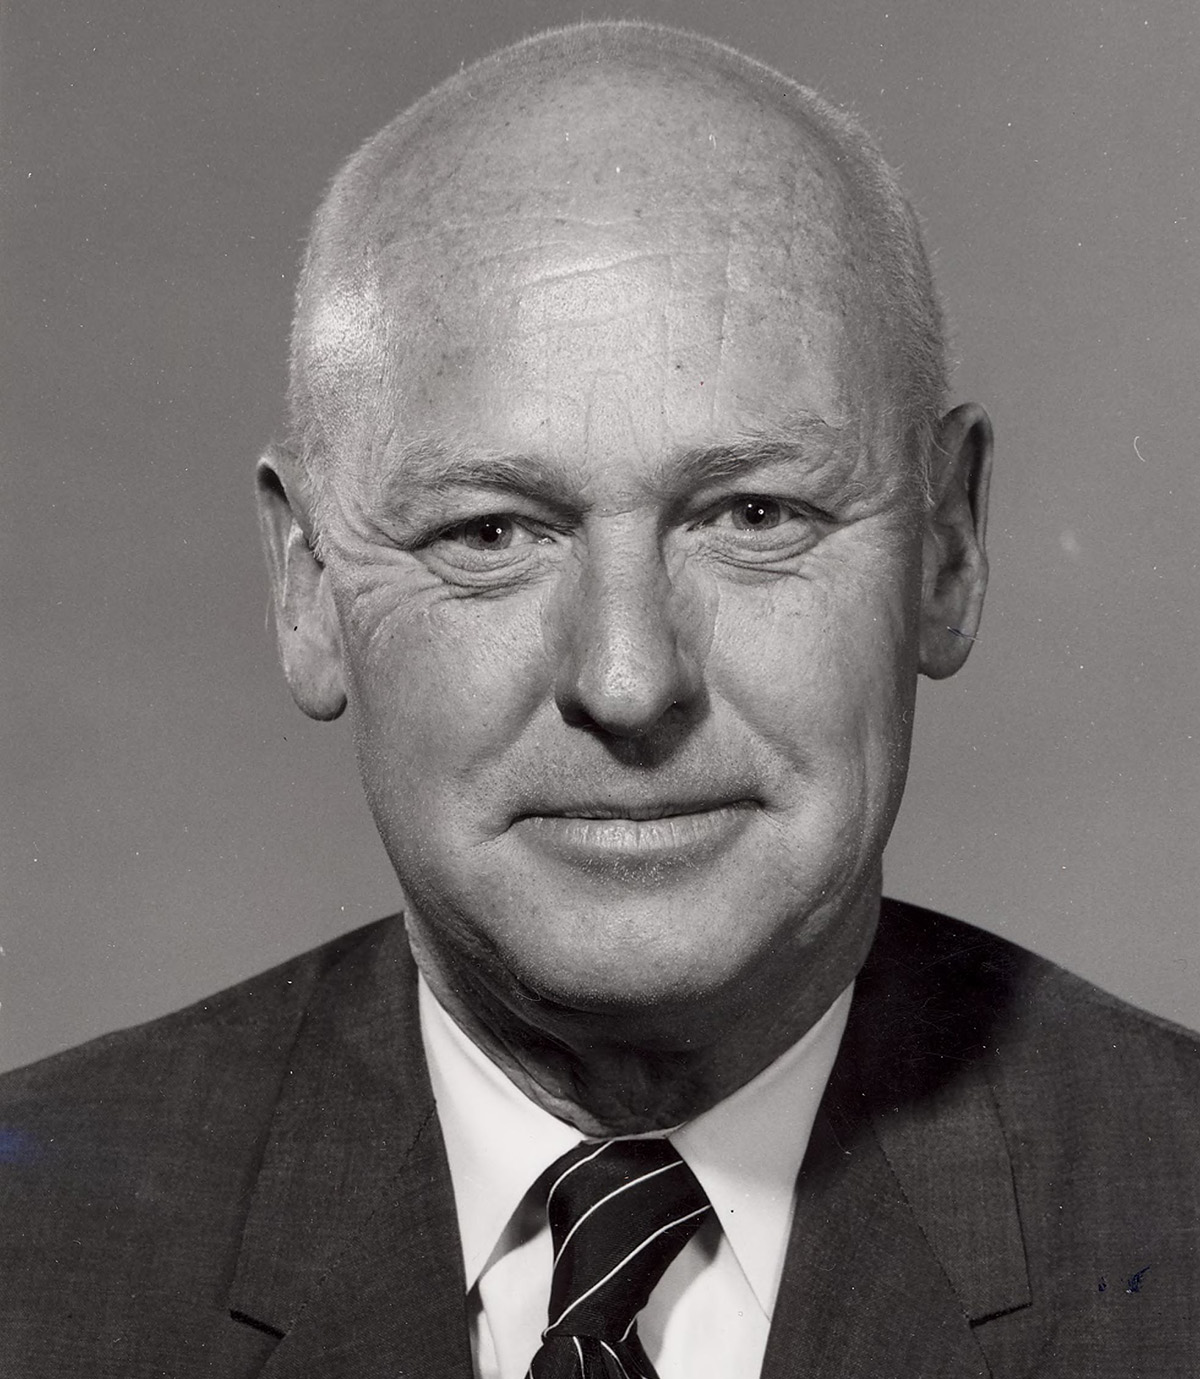 N. Edd Miller, President of the University of Nevada from 1965-1973, poses here for a formal portrait.